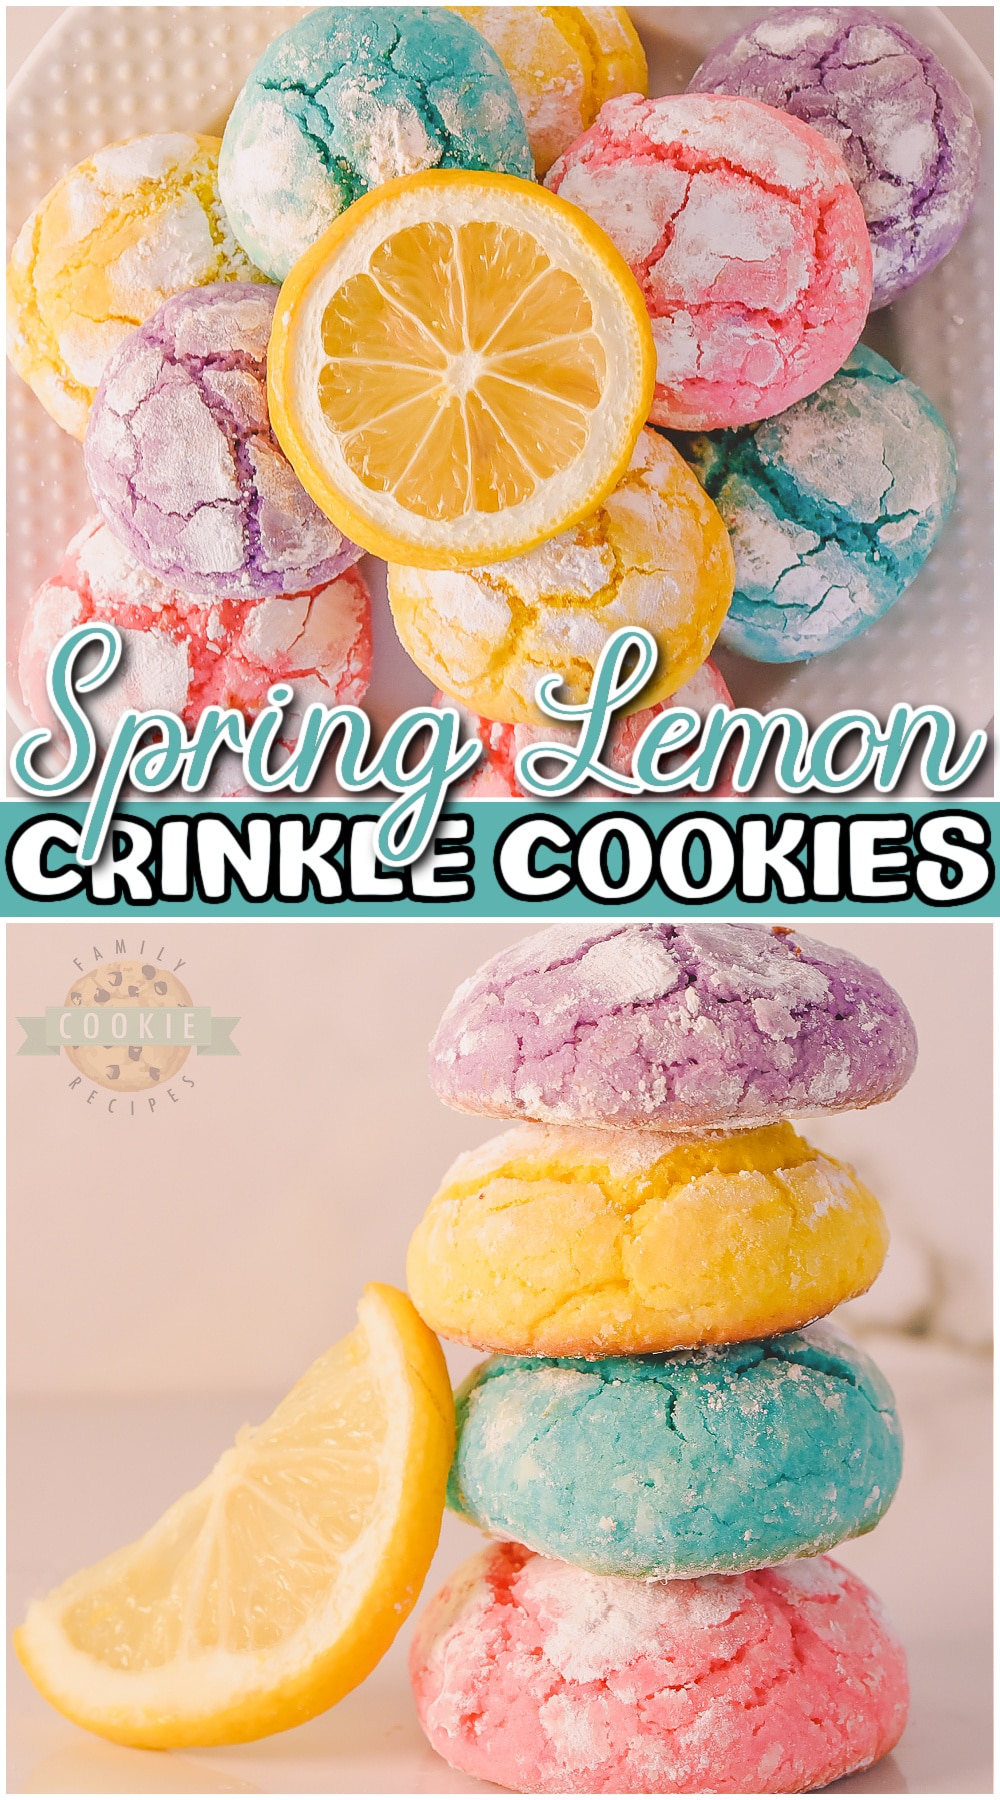 Spring Lemon Crinkle Cookies with amazing lemon flavor & vibrant, festive colors!  Homemade Lemon crinkle cookies are perfect for Easter! via @buttergirls